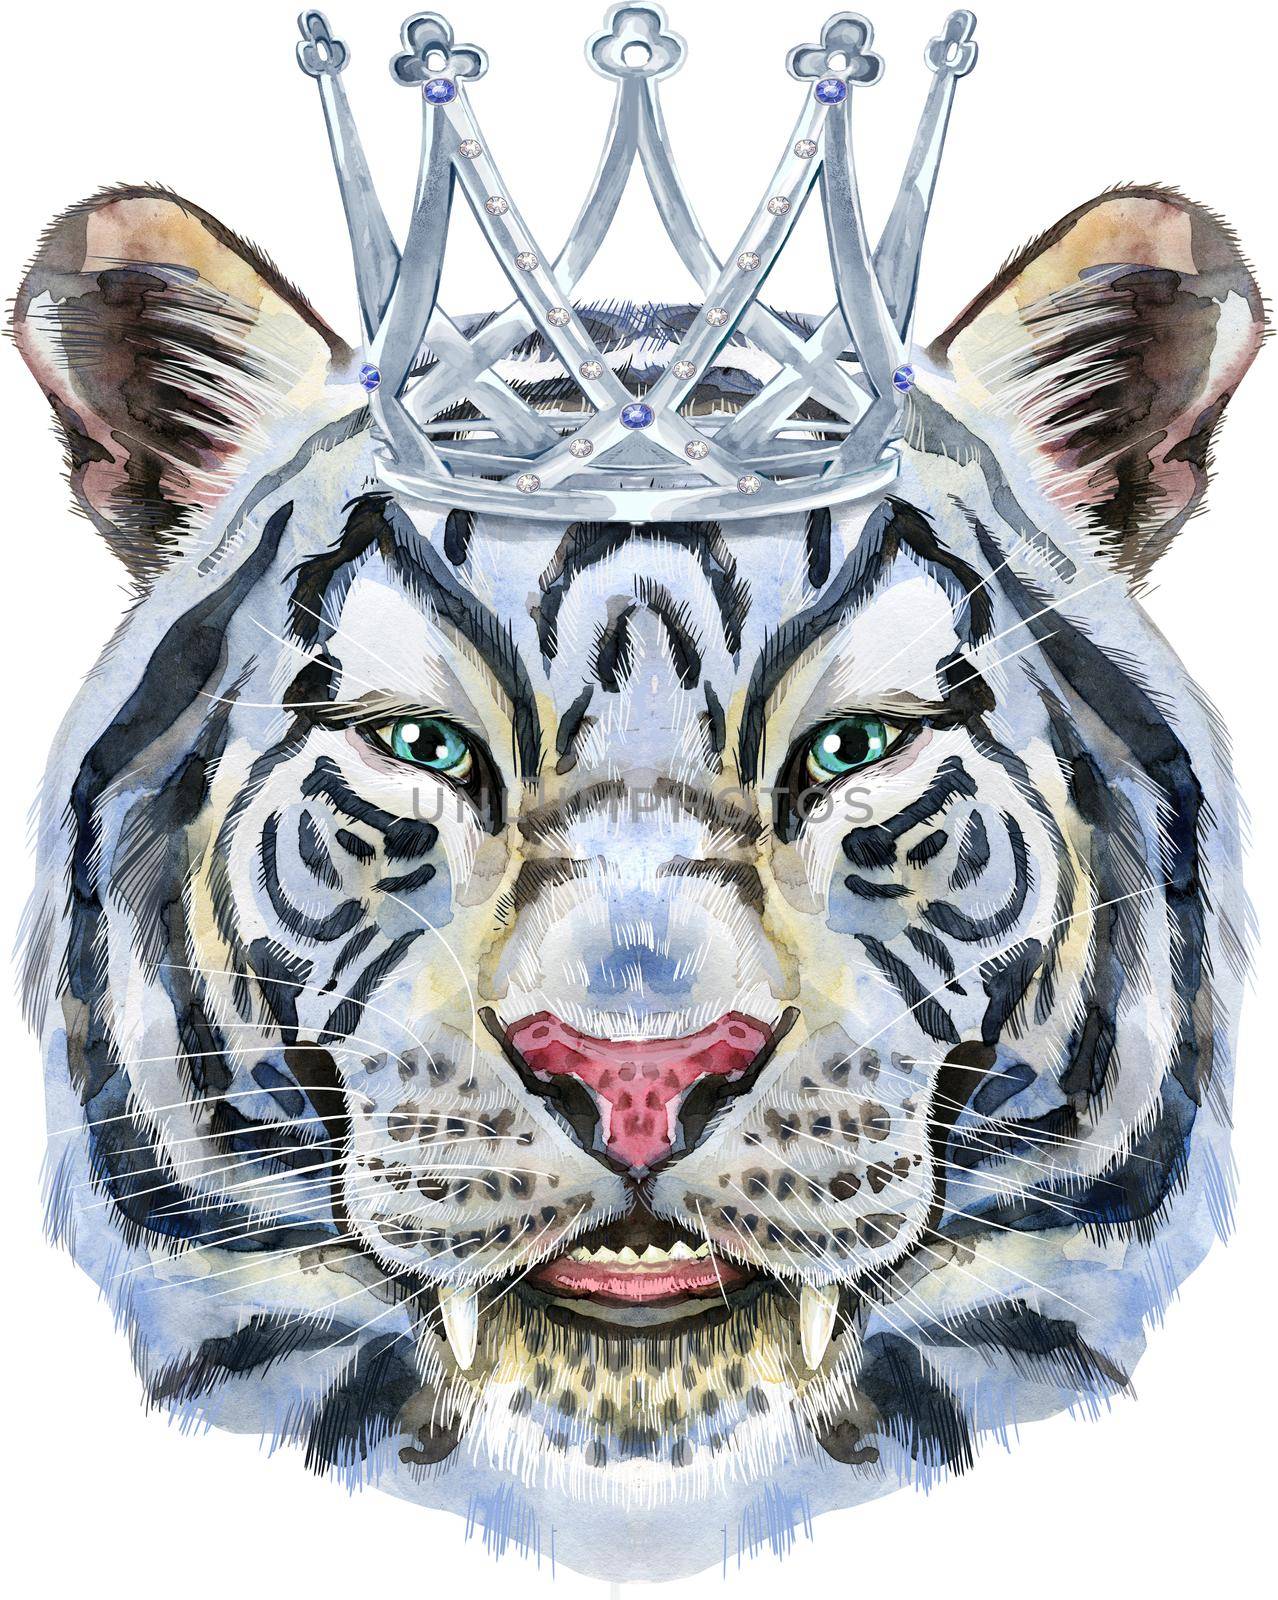 Colorful white smiling tiger with silver crown. Wild animal watercolor illustration on white background by NataOmsk